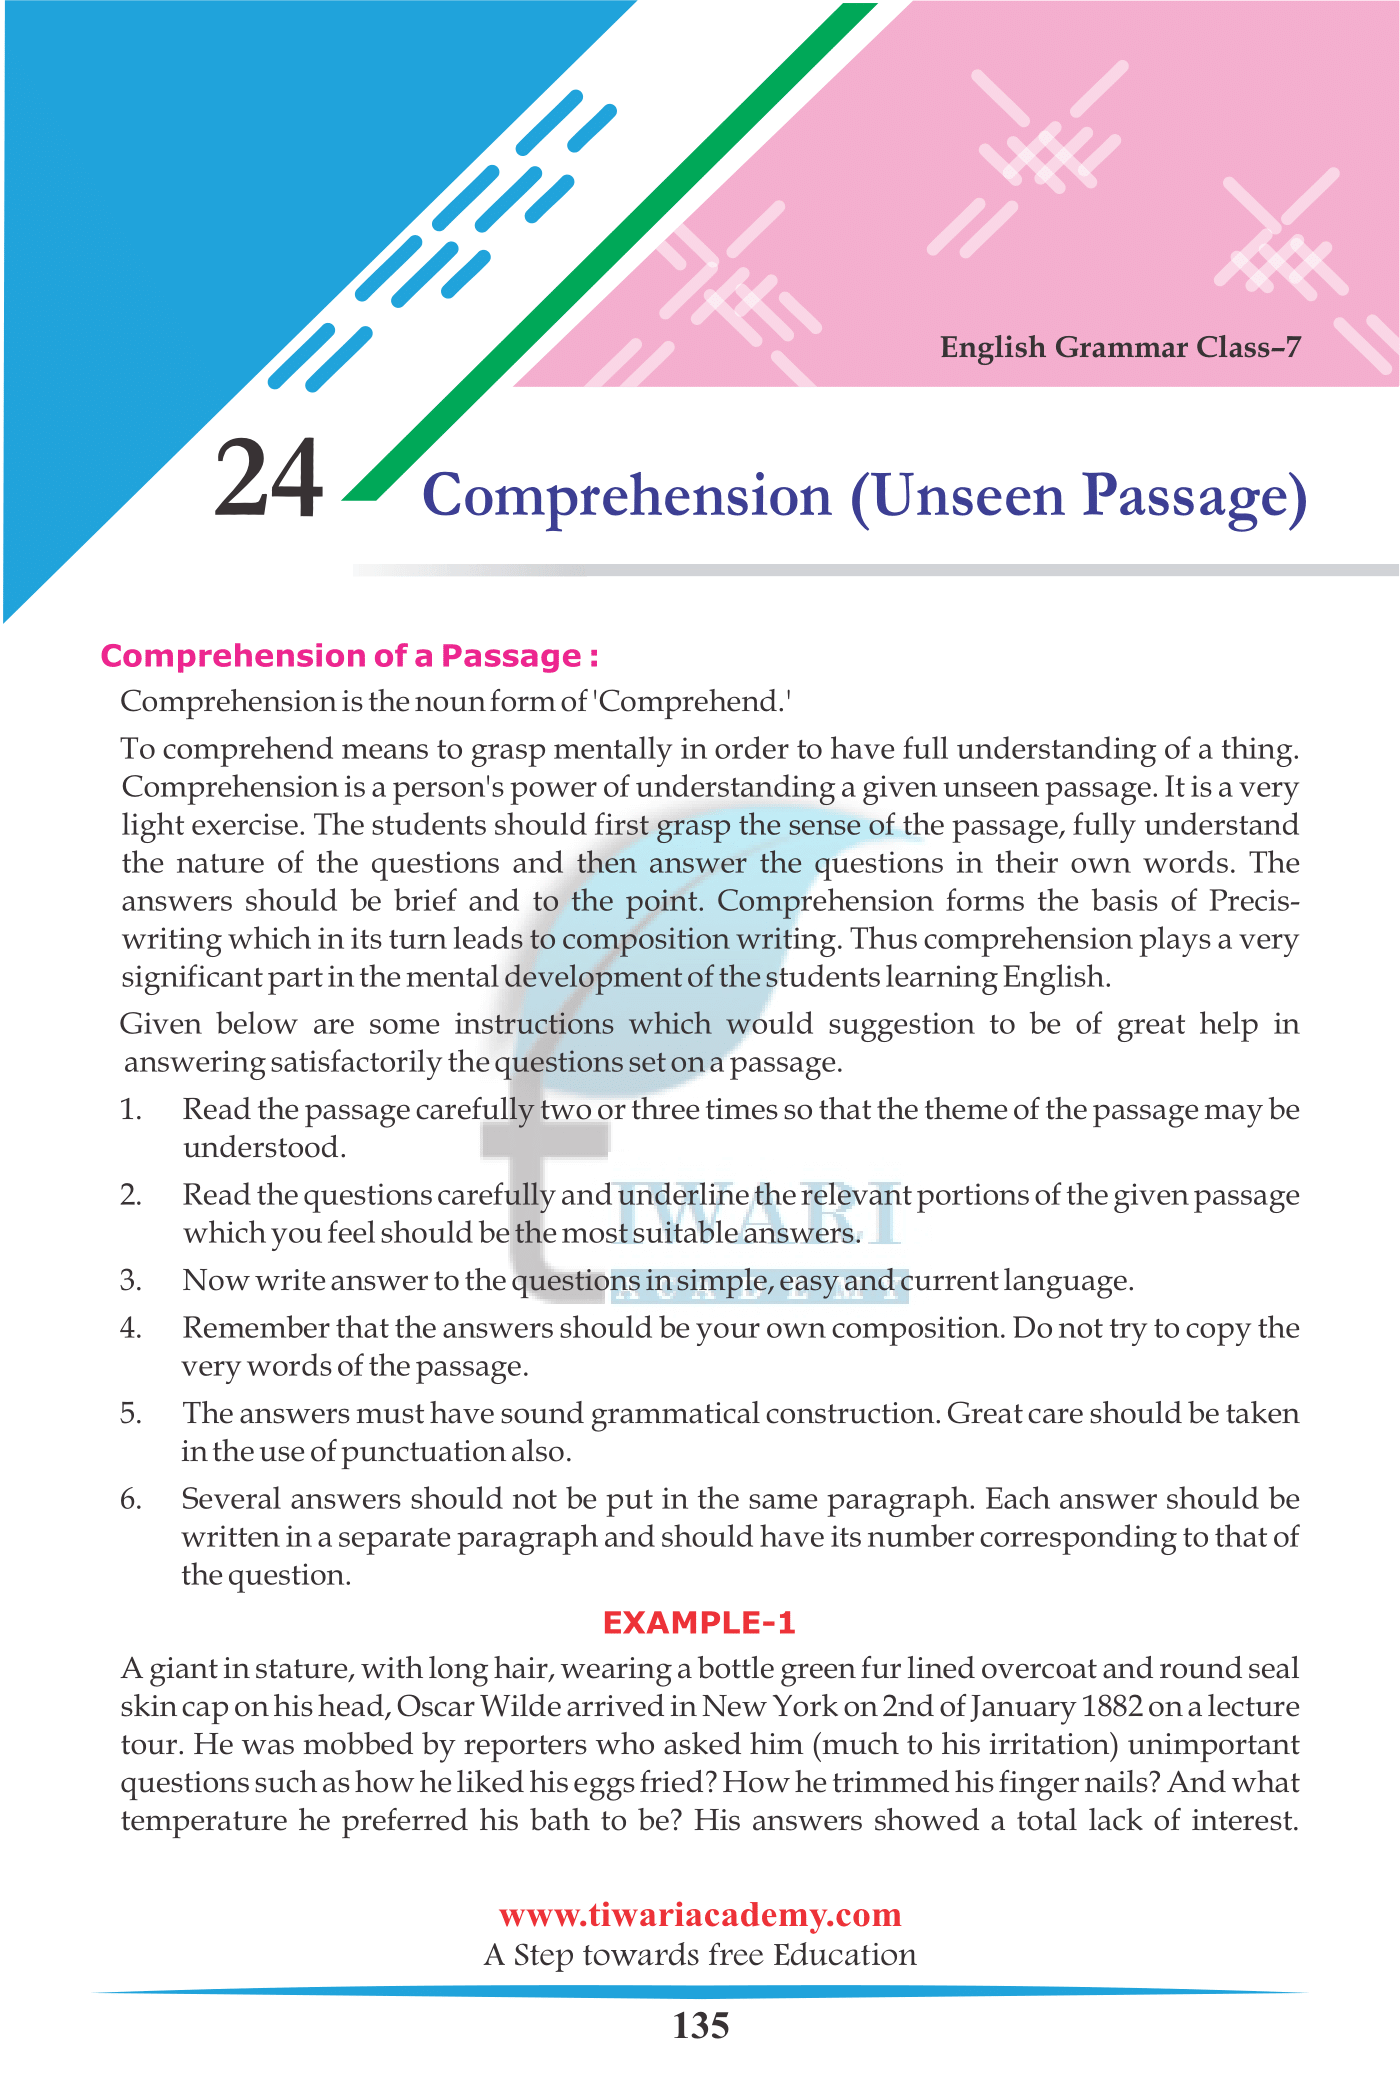 Class 7 English Grammar Chapter 24 Comprehension or Unseen Passage.